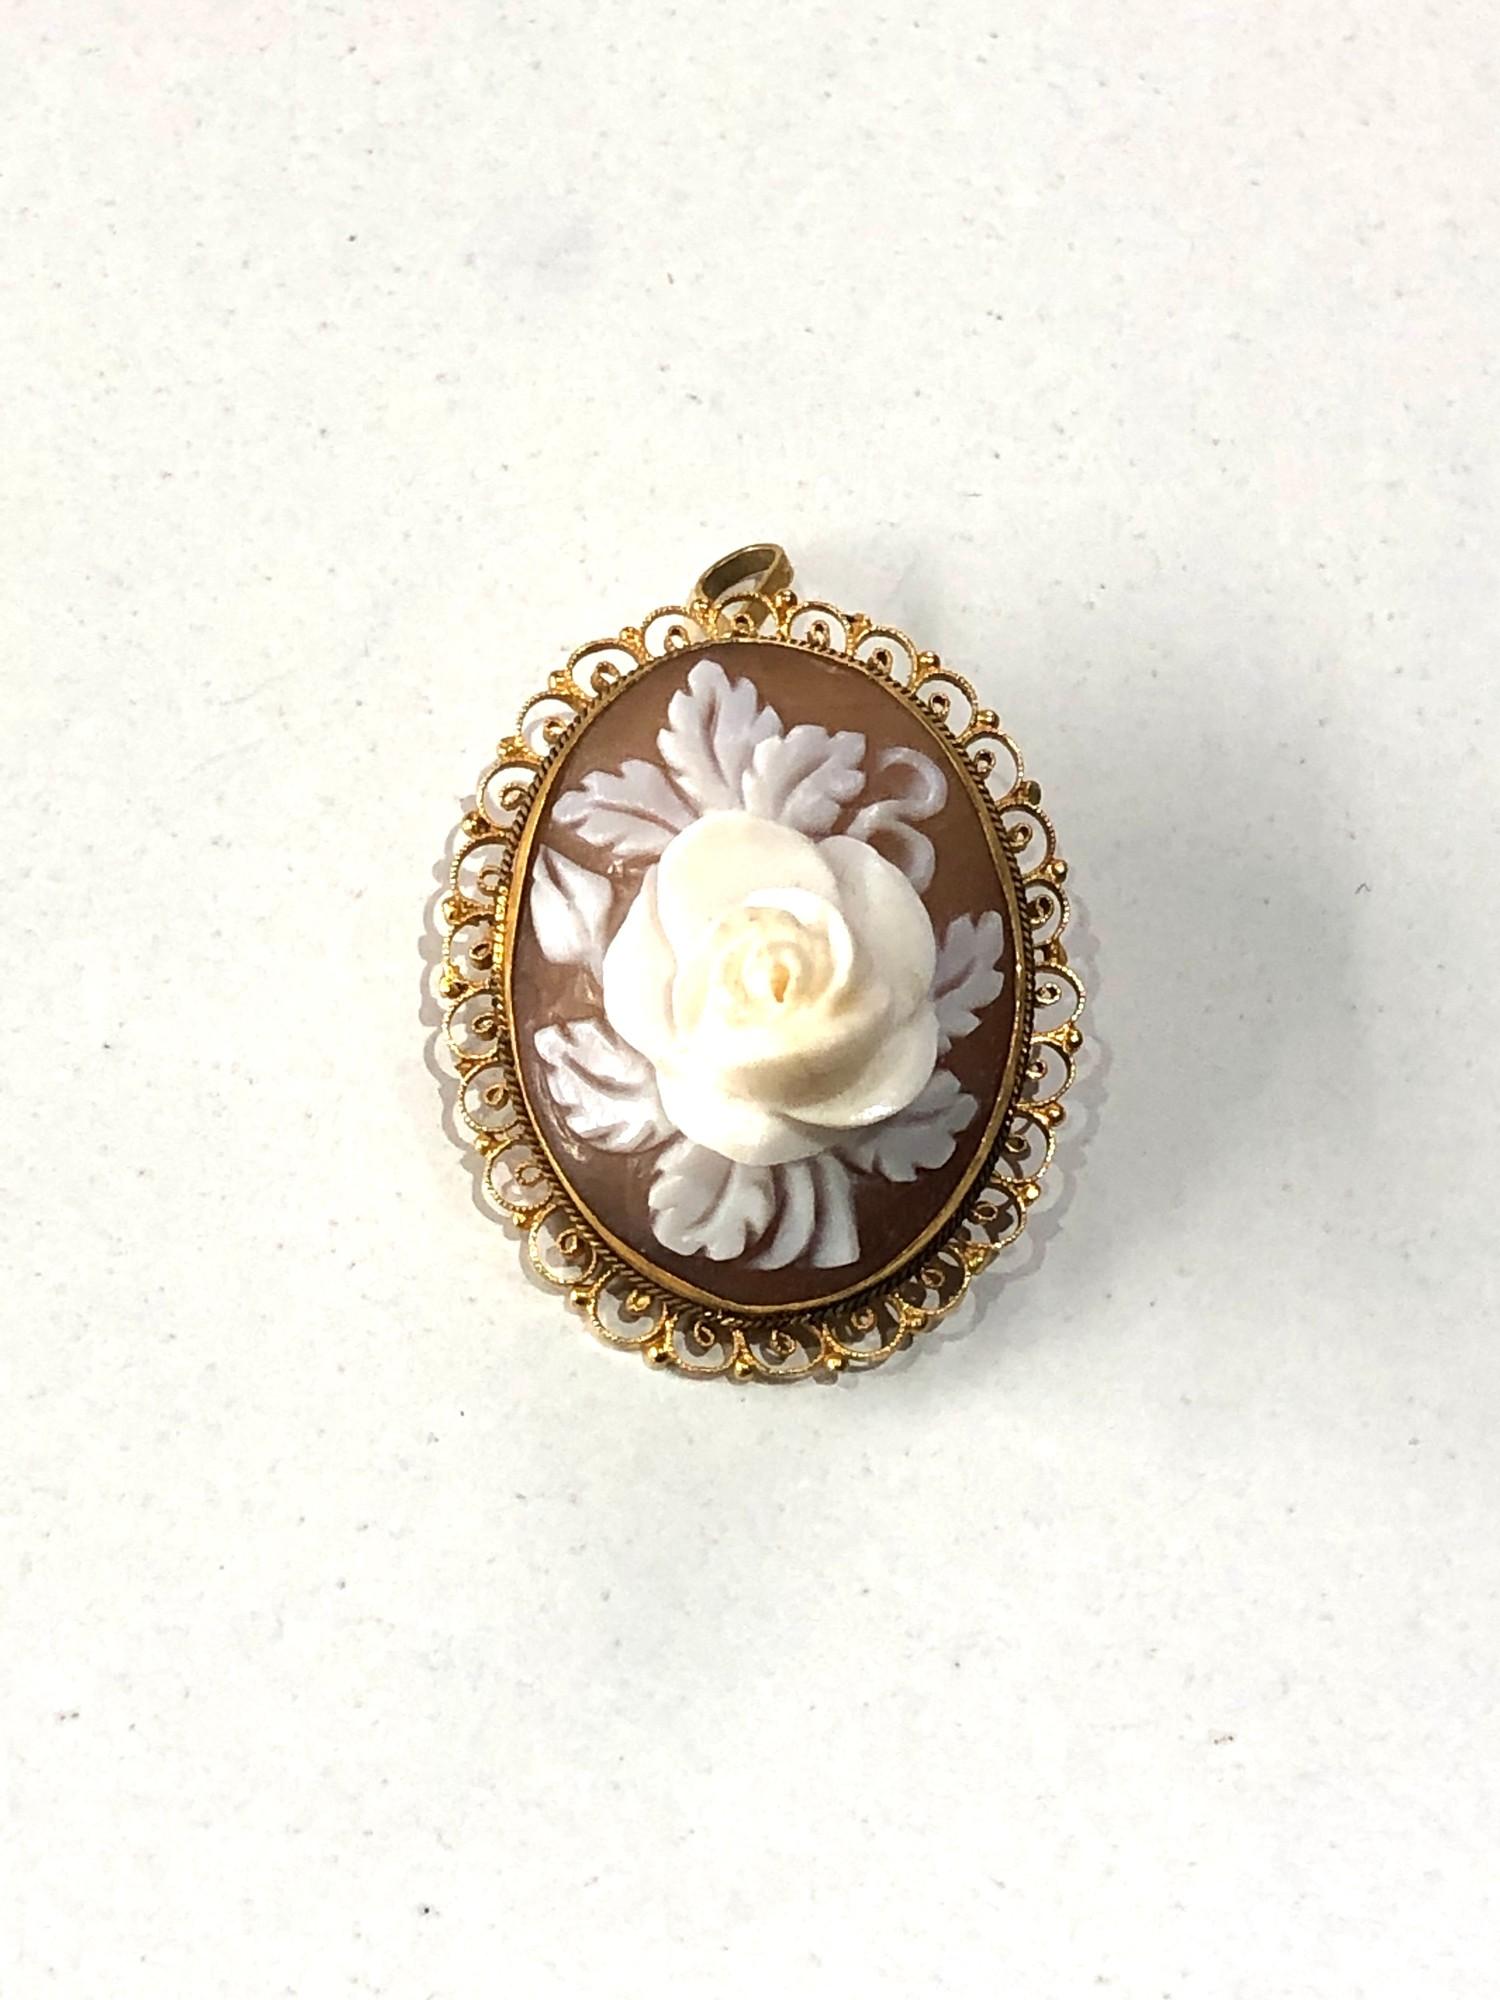 Antique 15ct framed cameo pendant brooch measures approx 3cm by 2.5cm weight 4.8g - Image 2 of 4